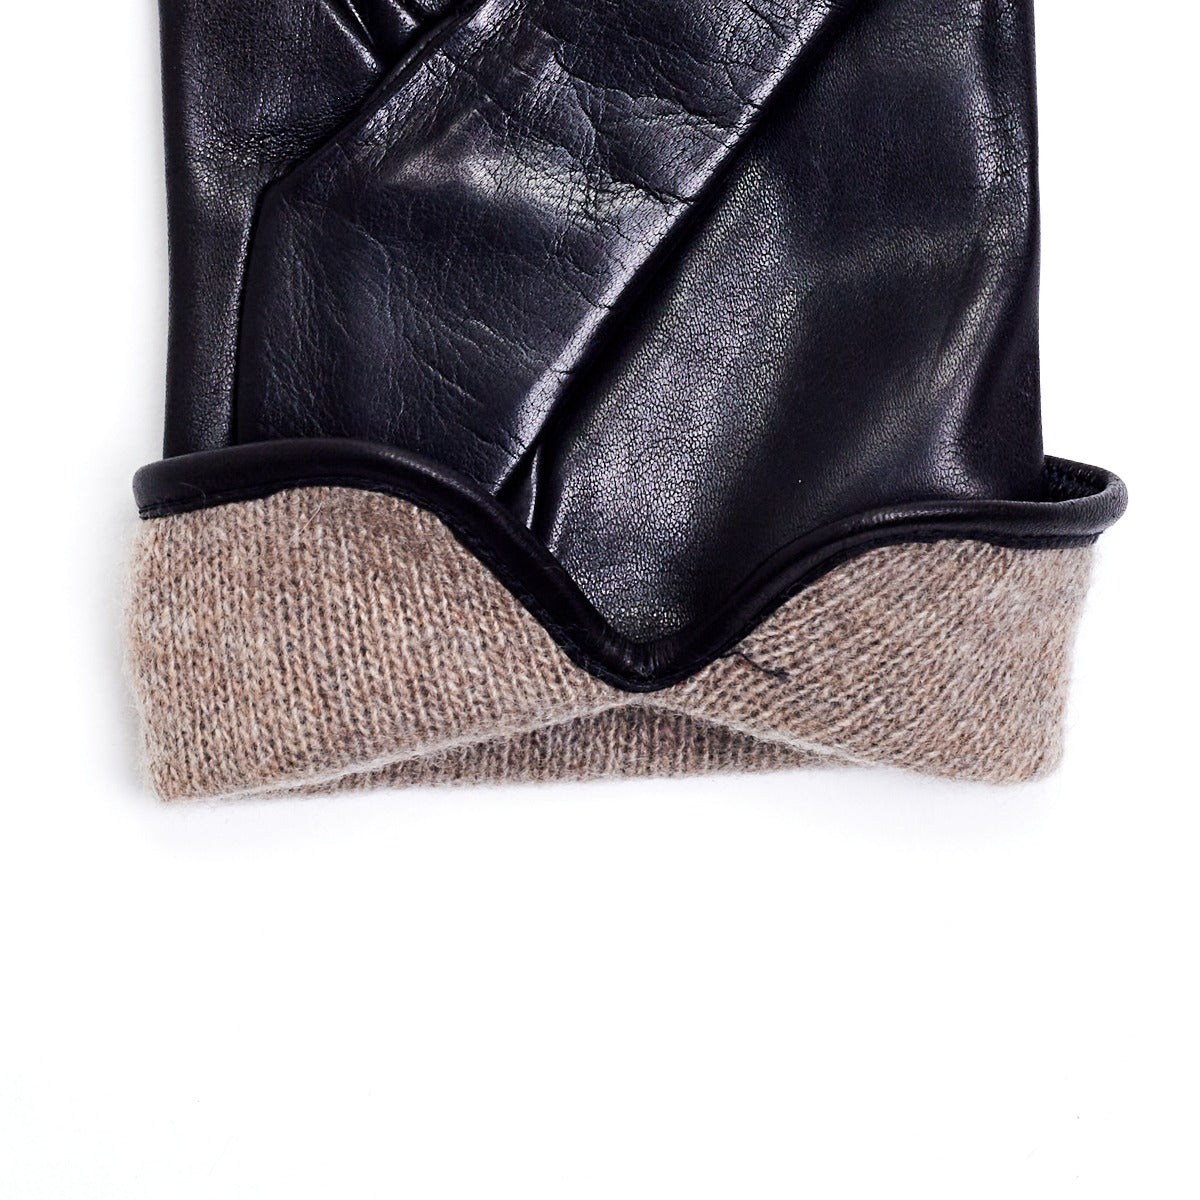 Sovereign Grade Black Nappa Leather Gloves, Cashmere Lined